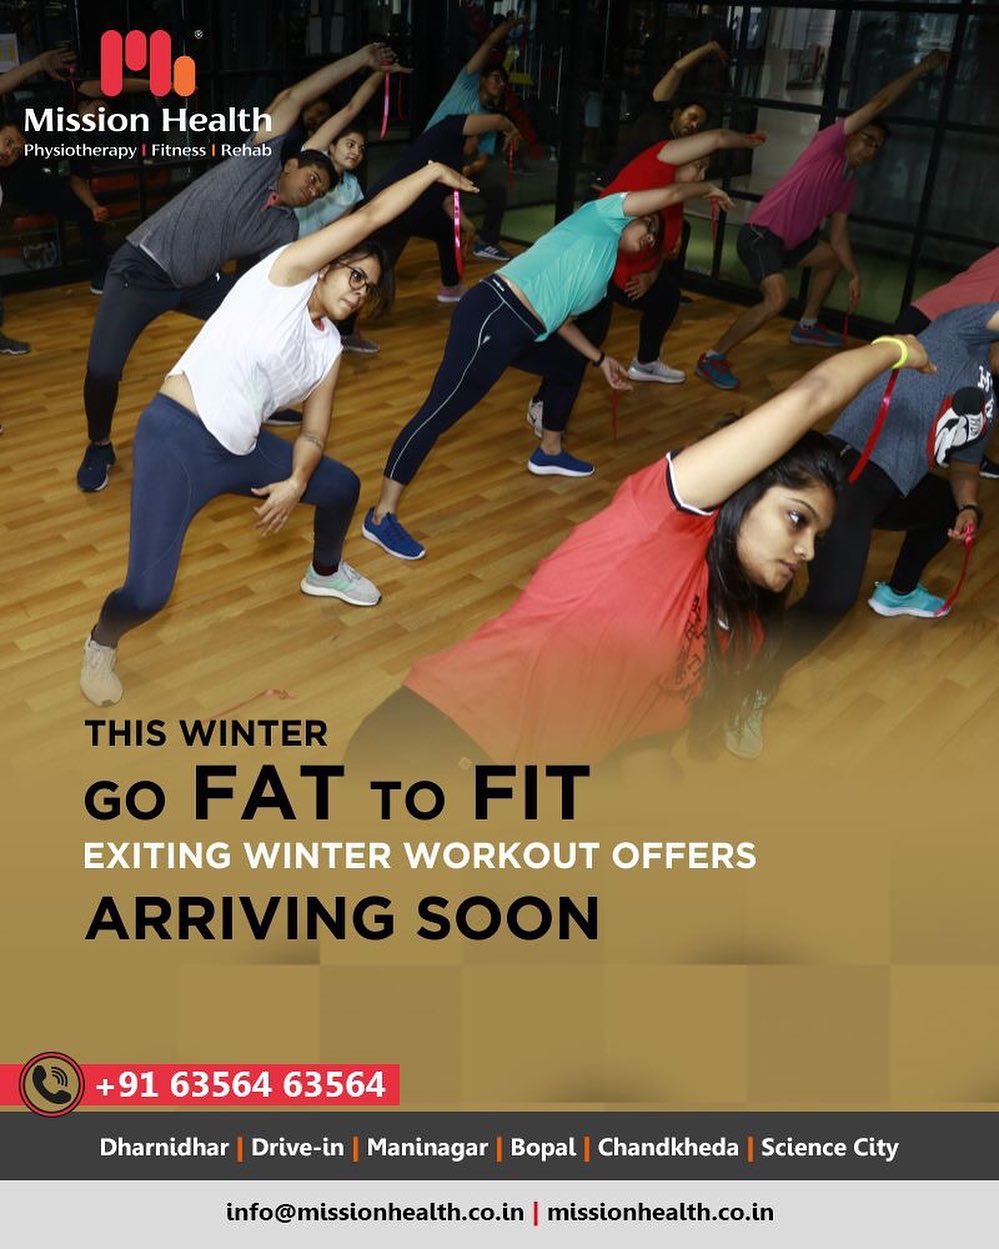 13+ Fusion Group Workouts at Mission Health Fitness Boutique. Meticulously designed workouts ensure 360° fitness. Go FAT to FIT this winter.

Call: +916356463564 
Visit: www.missionhealth.co.in

#MissionHealth #MissionHealthIndia #MovementIsLife #AbilityClinic